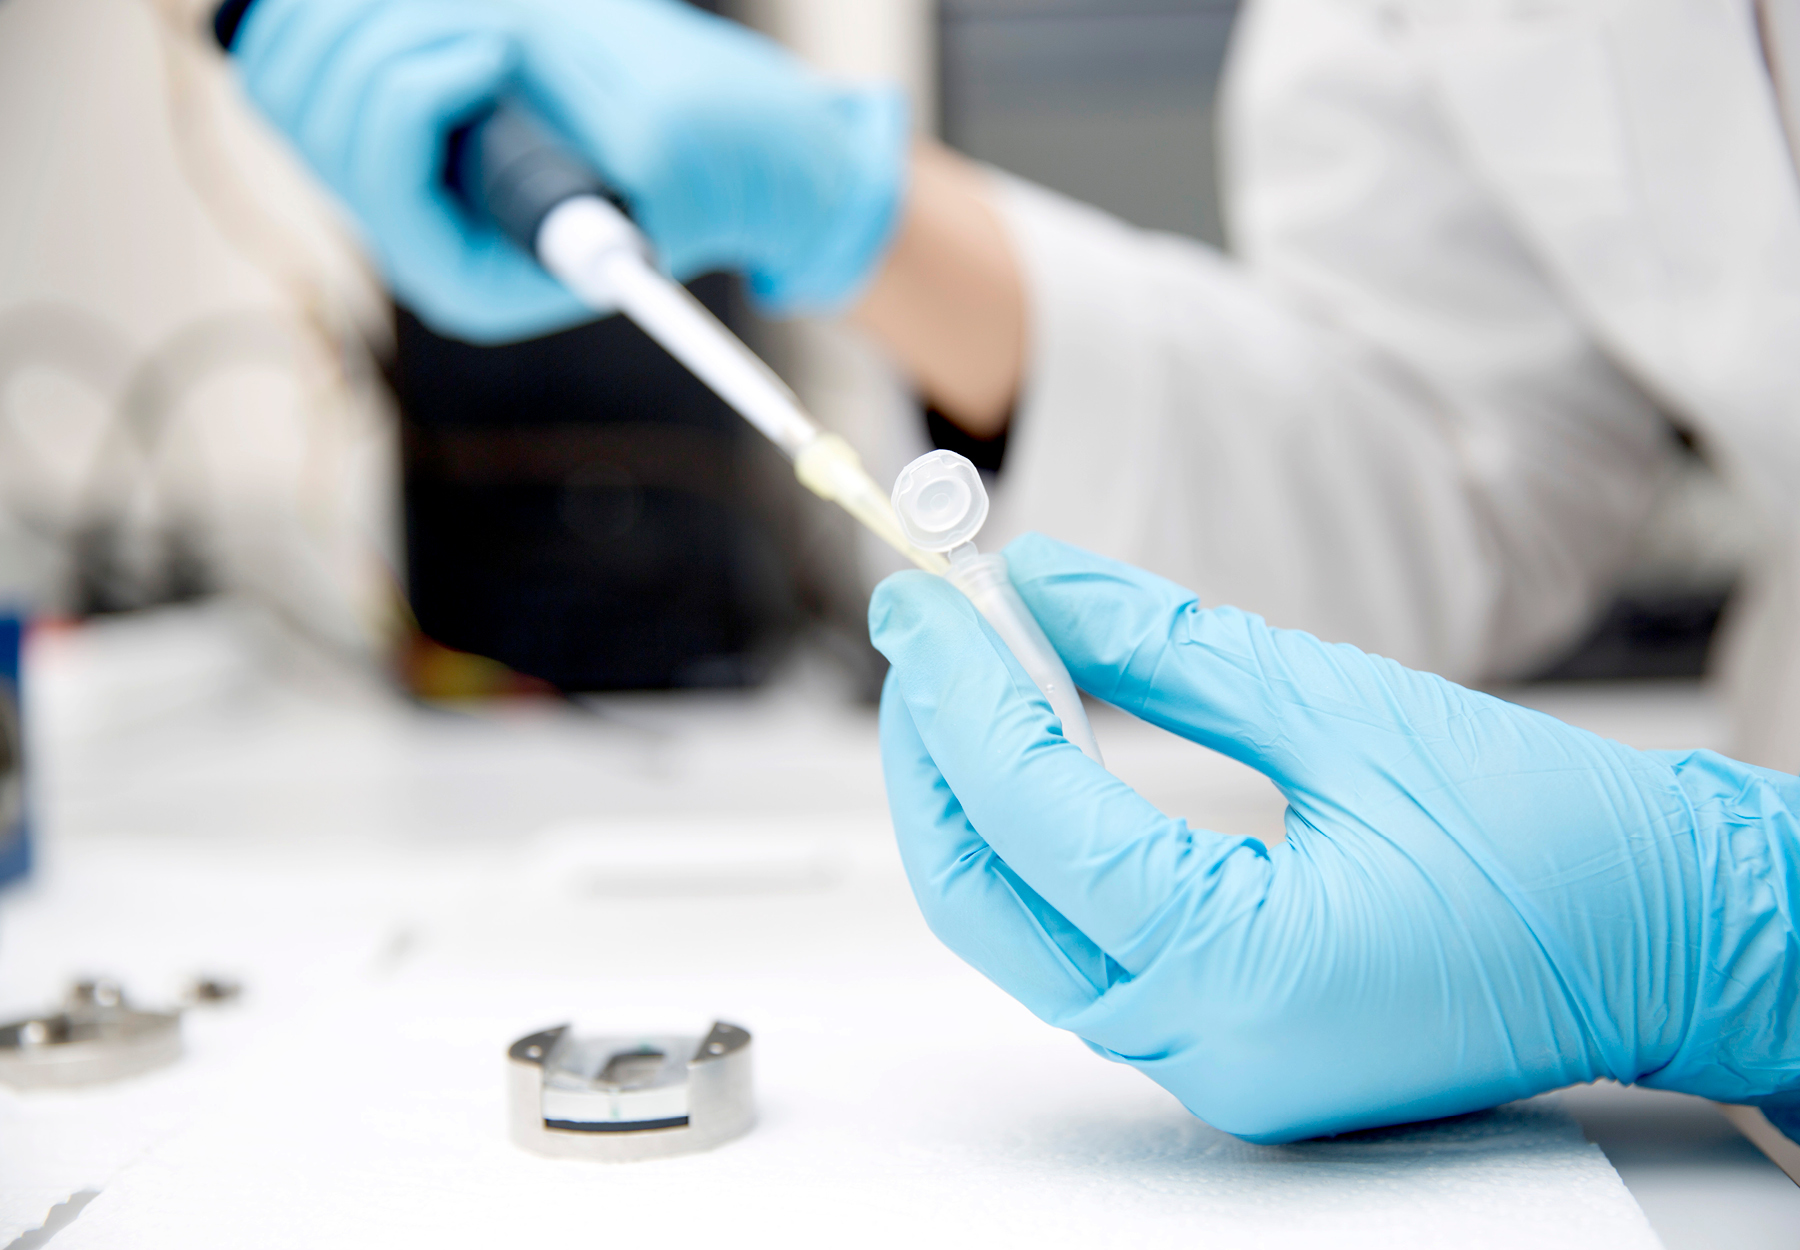 Closeup of lab worker pipetting during a medical lab test. iStock image.